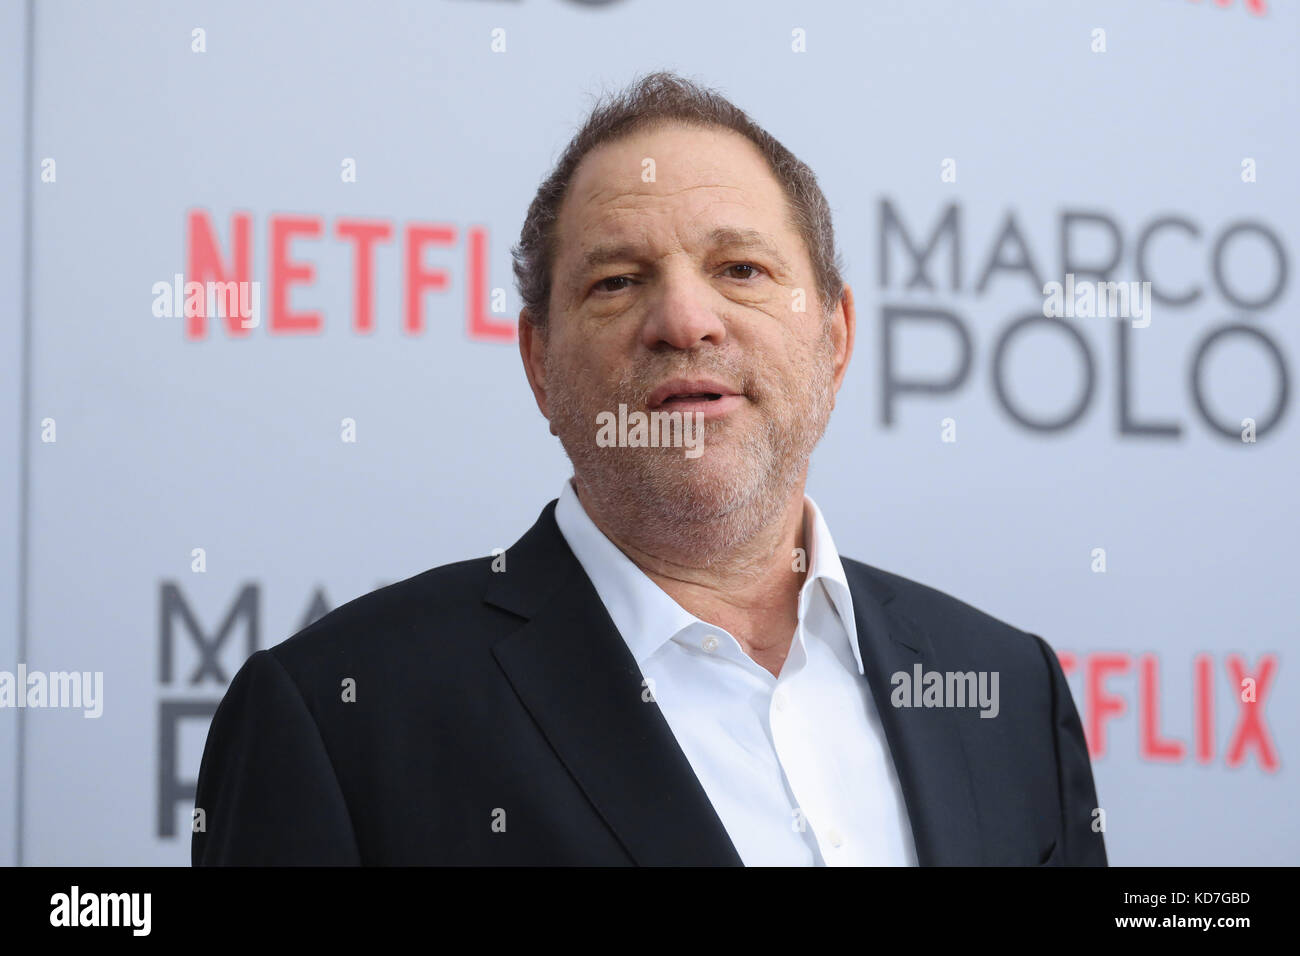 Film producer Harvey Weinstein attends the 'Marco Polo' New York series premiere at AMC Lincoln Square Theater on December 2, 2014 in New York City. Stock Photo